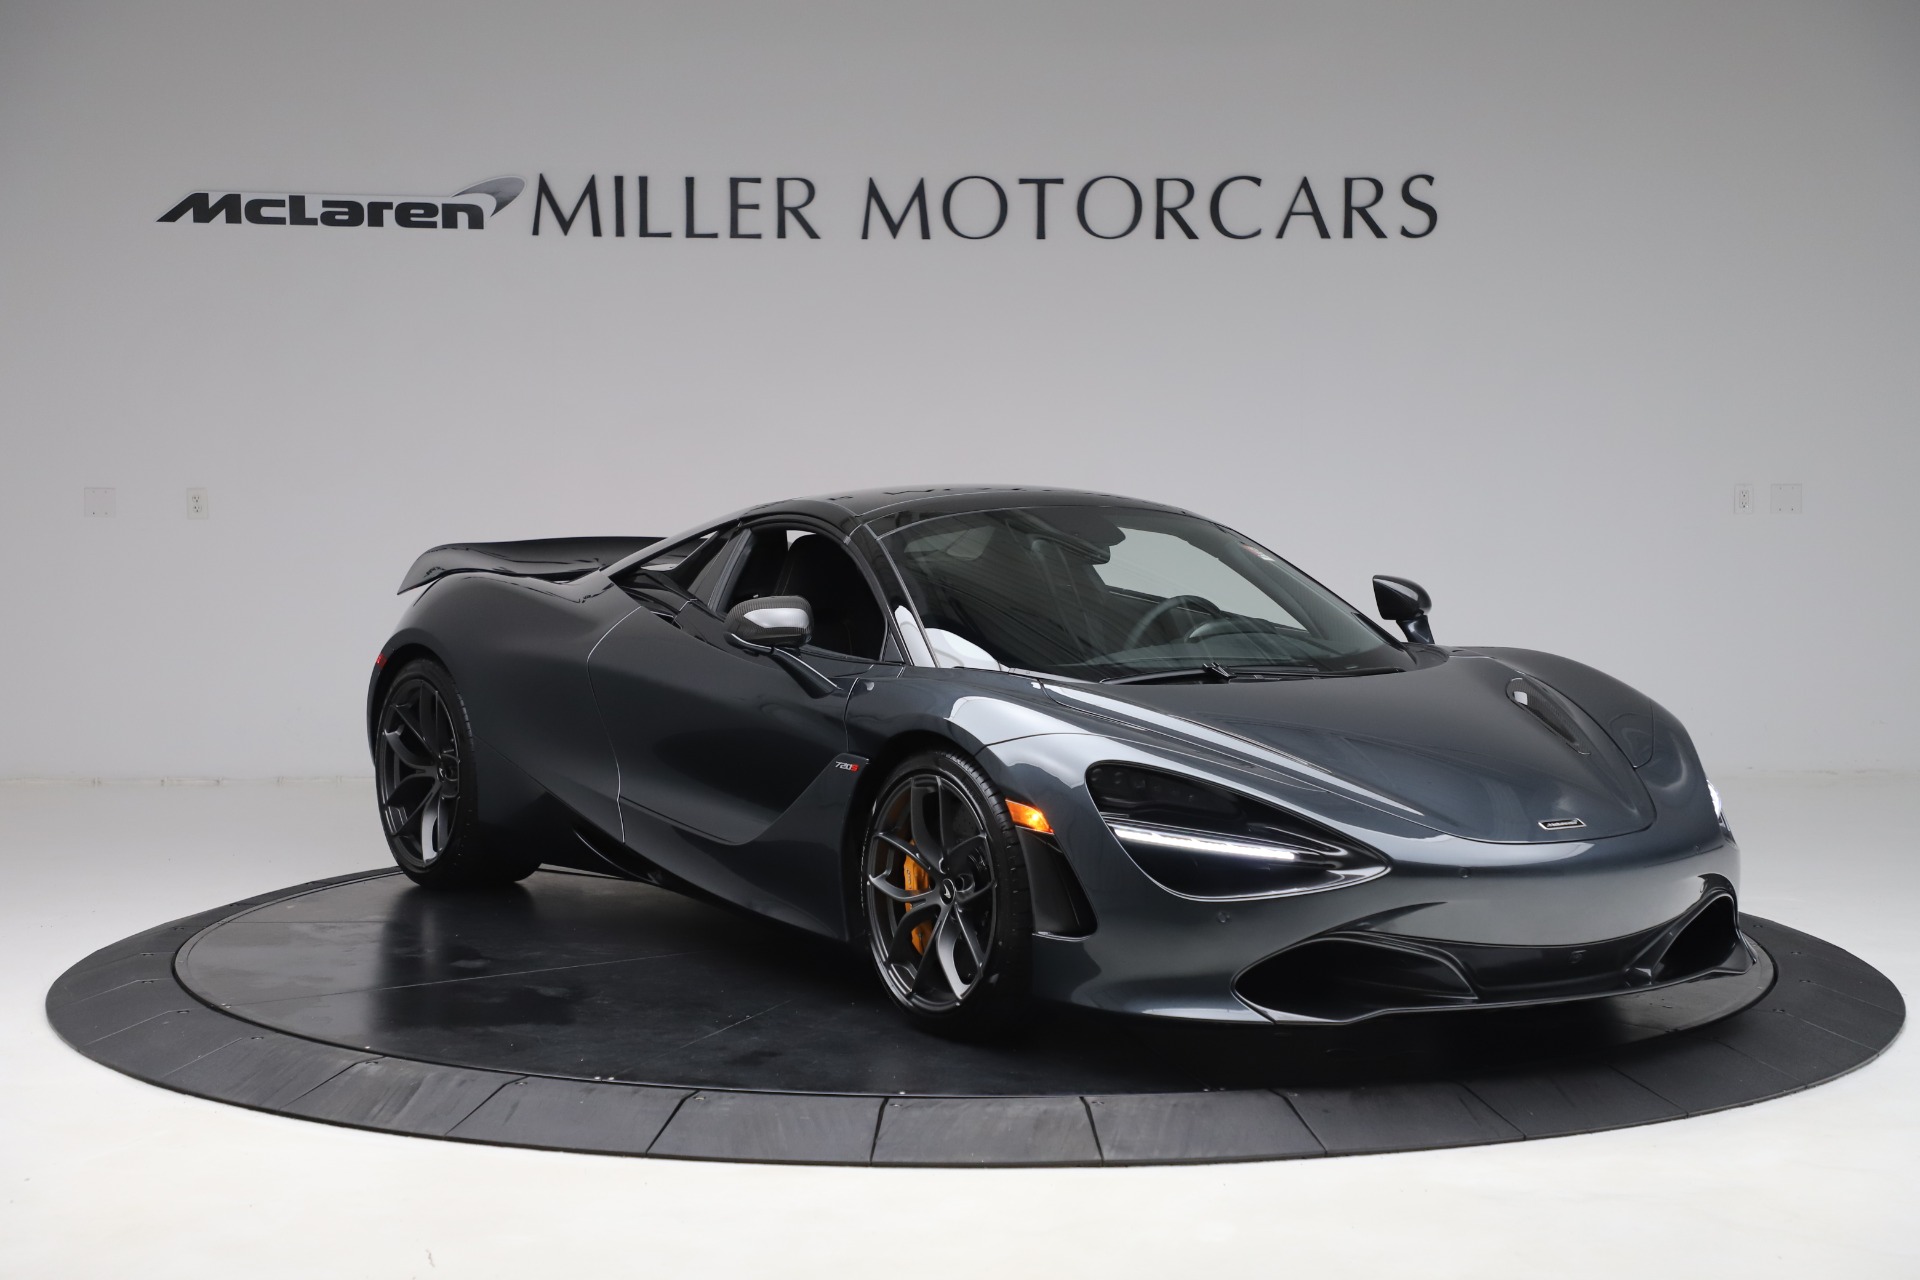 720s grey and black